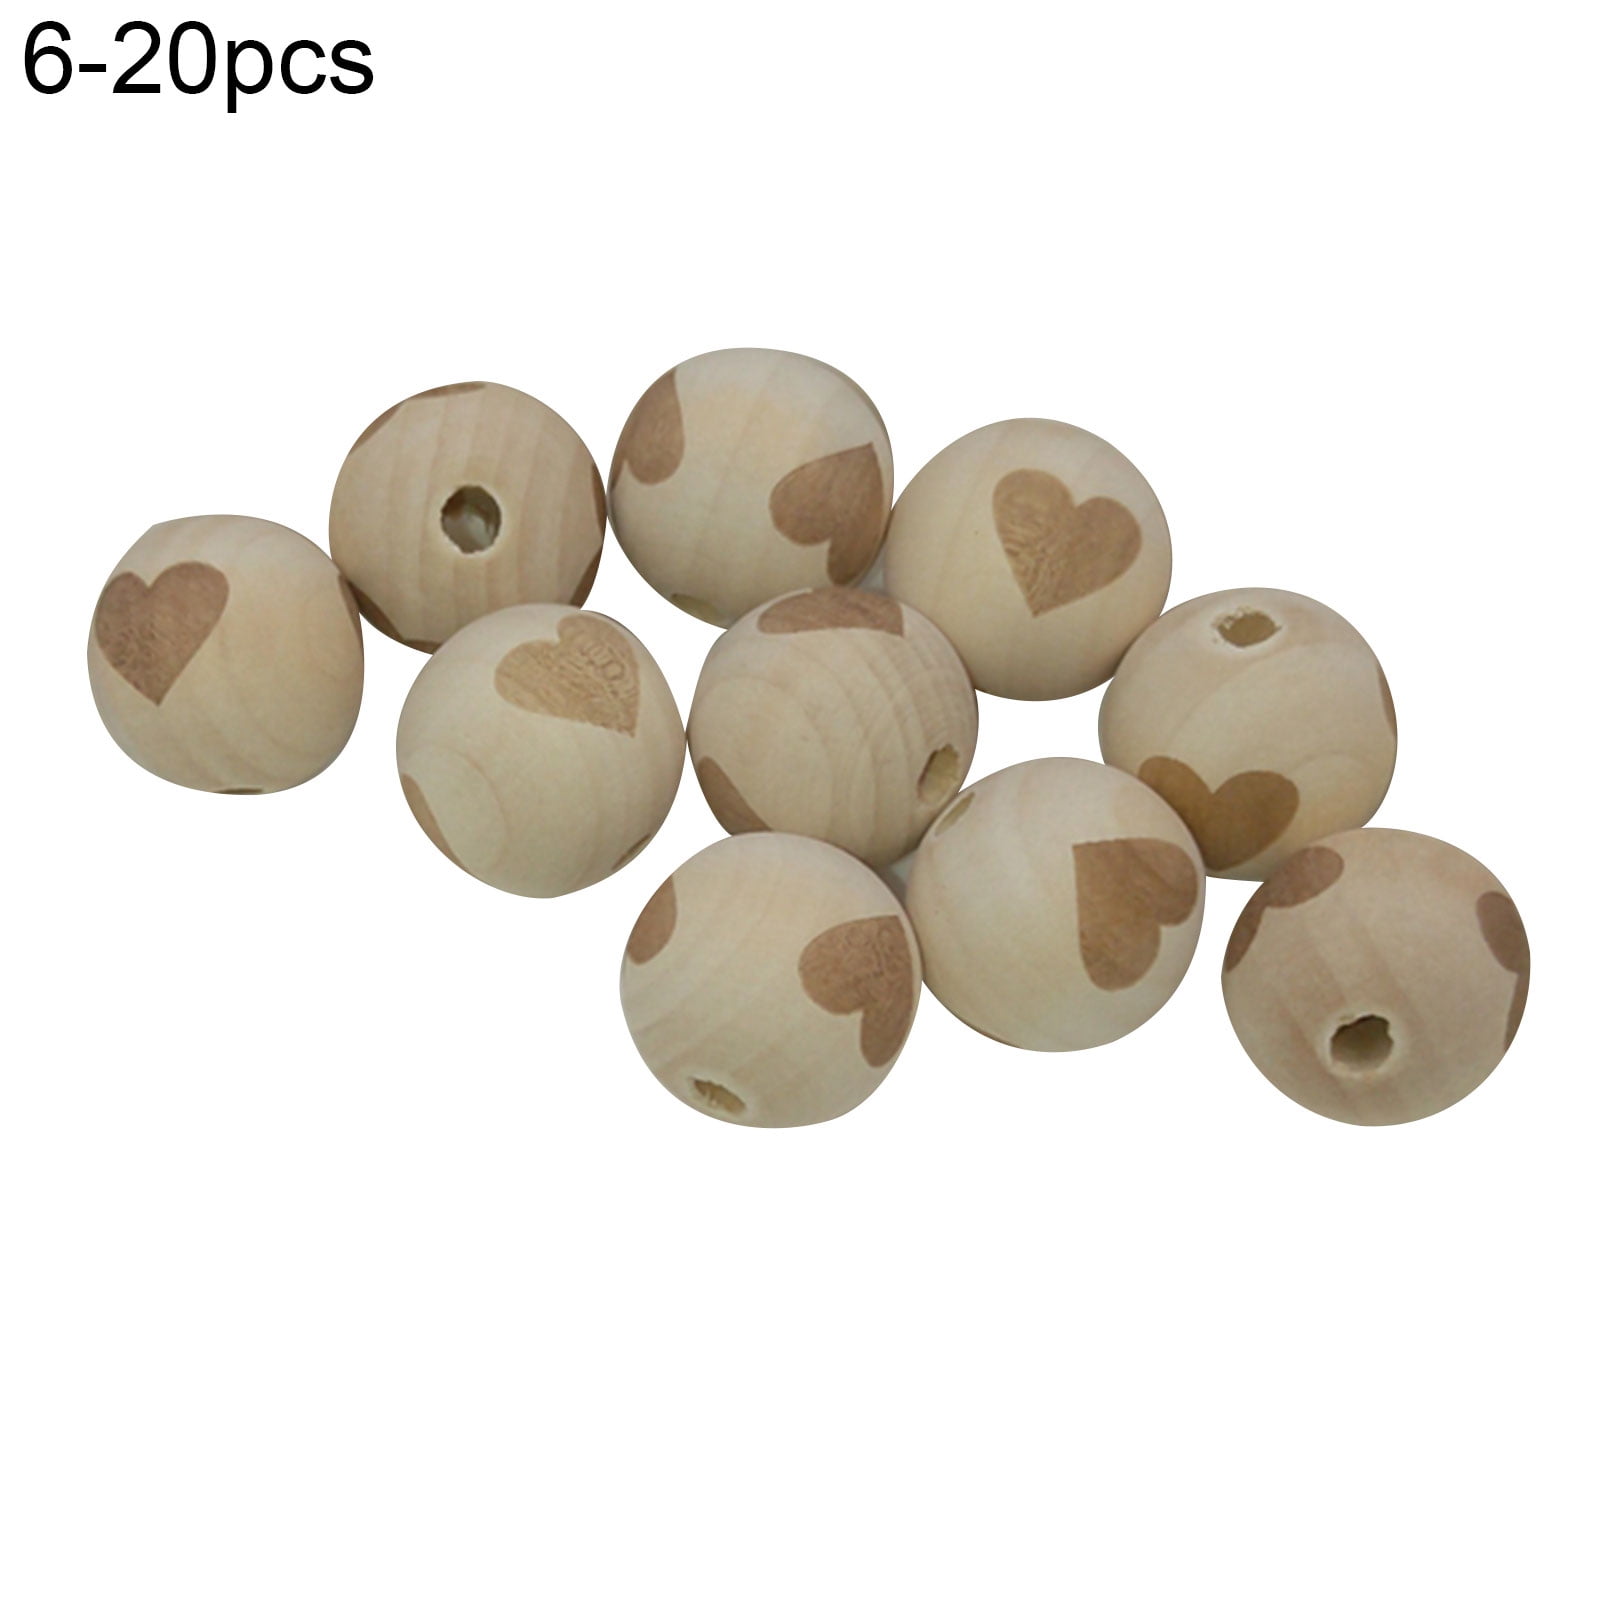 Necklace Bracelet DIY Crafts 20pcs Natural Wooden Teething Rings for Baby 